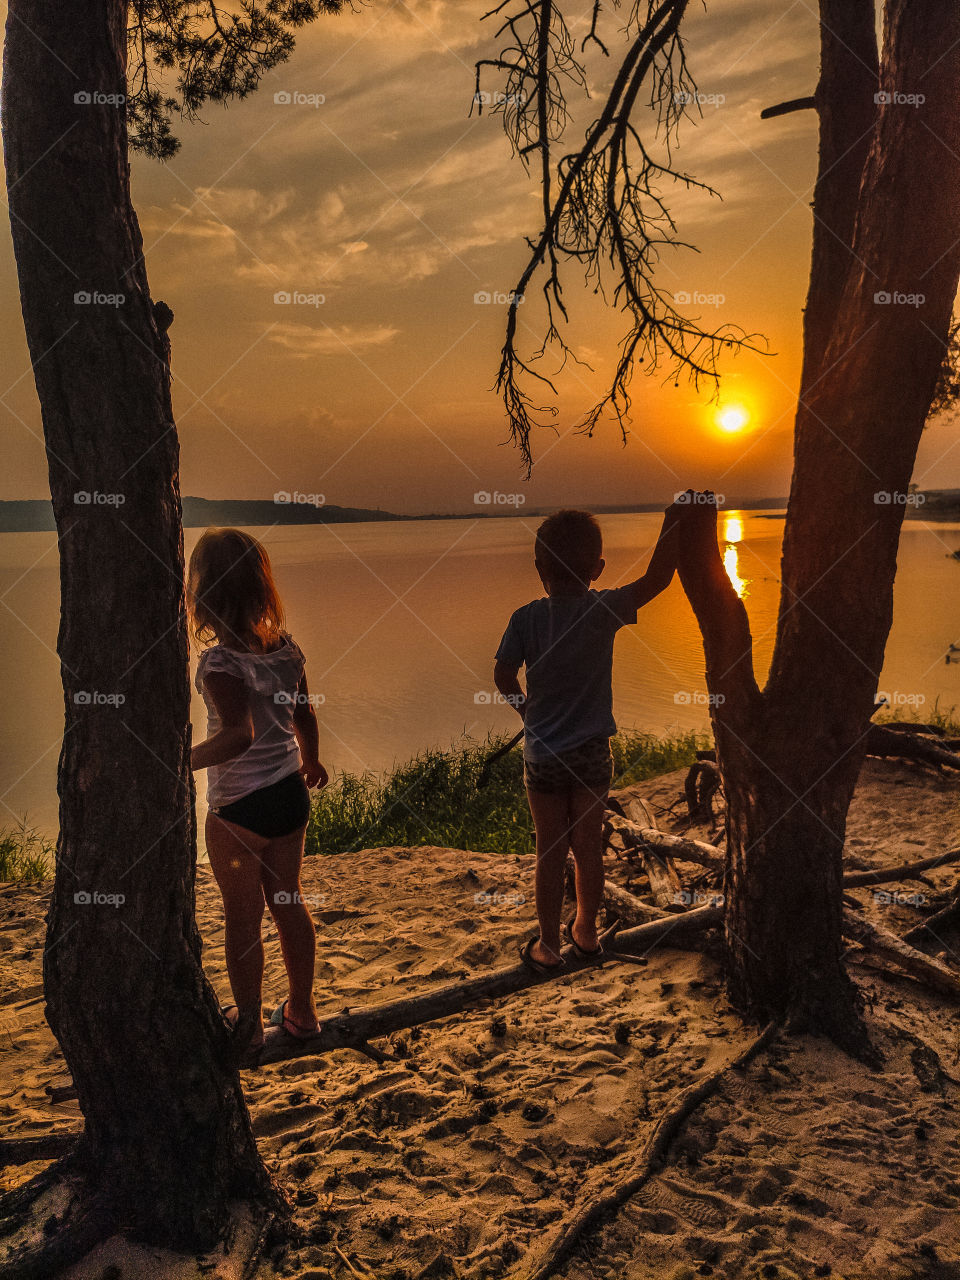 children watching the sunset on the river